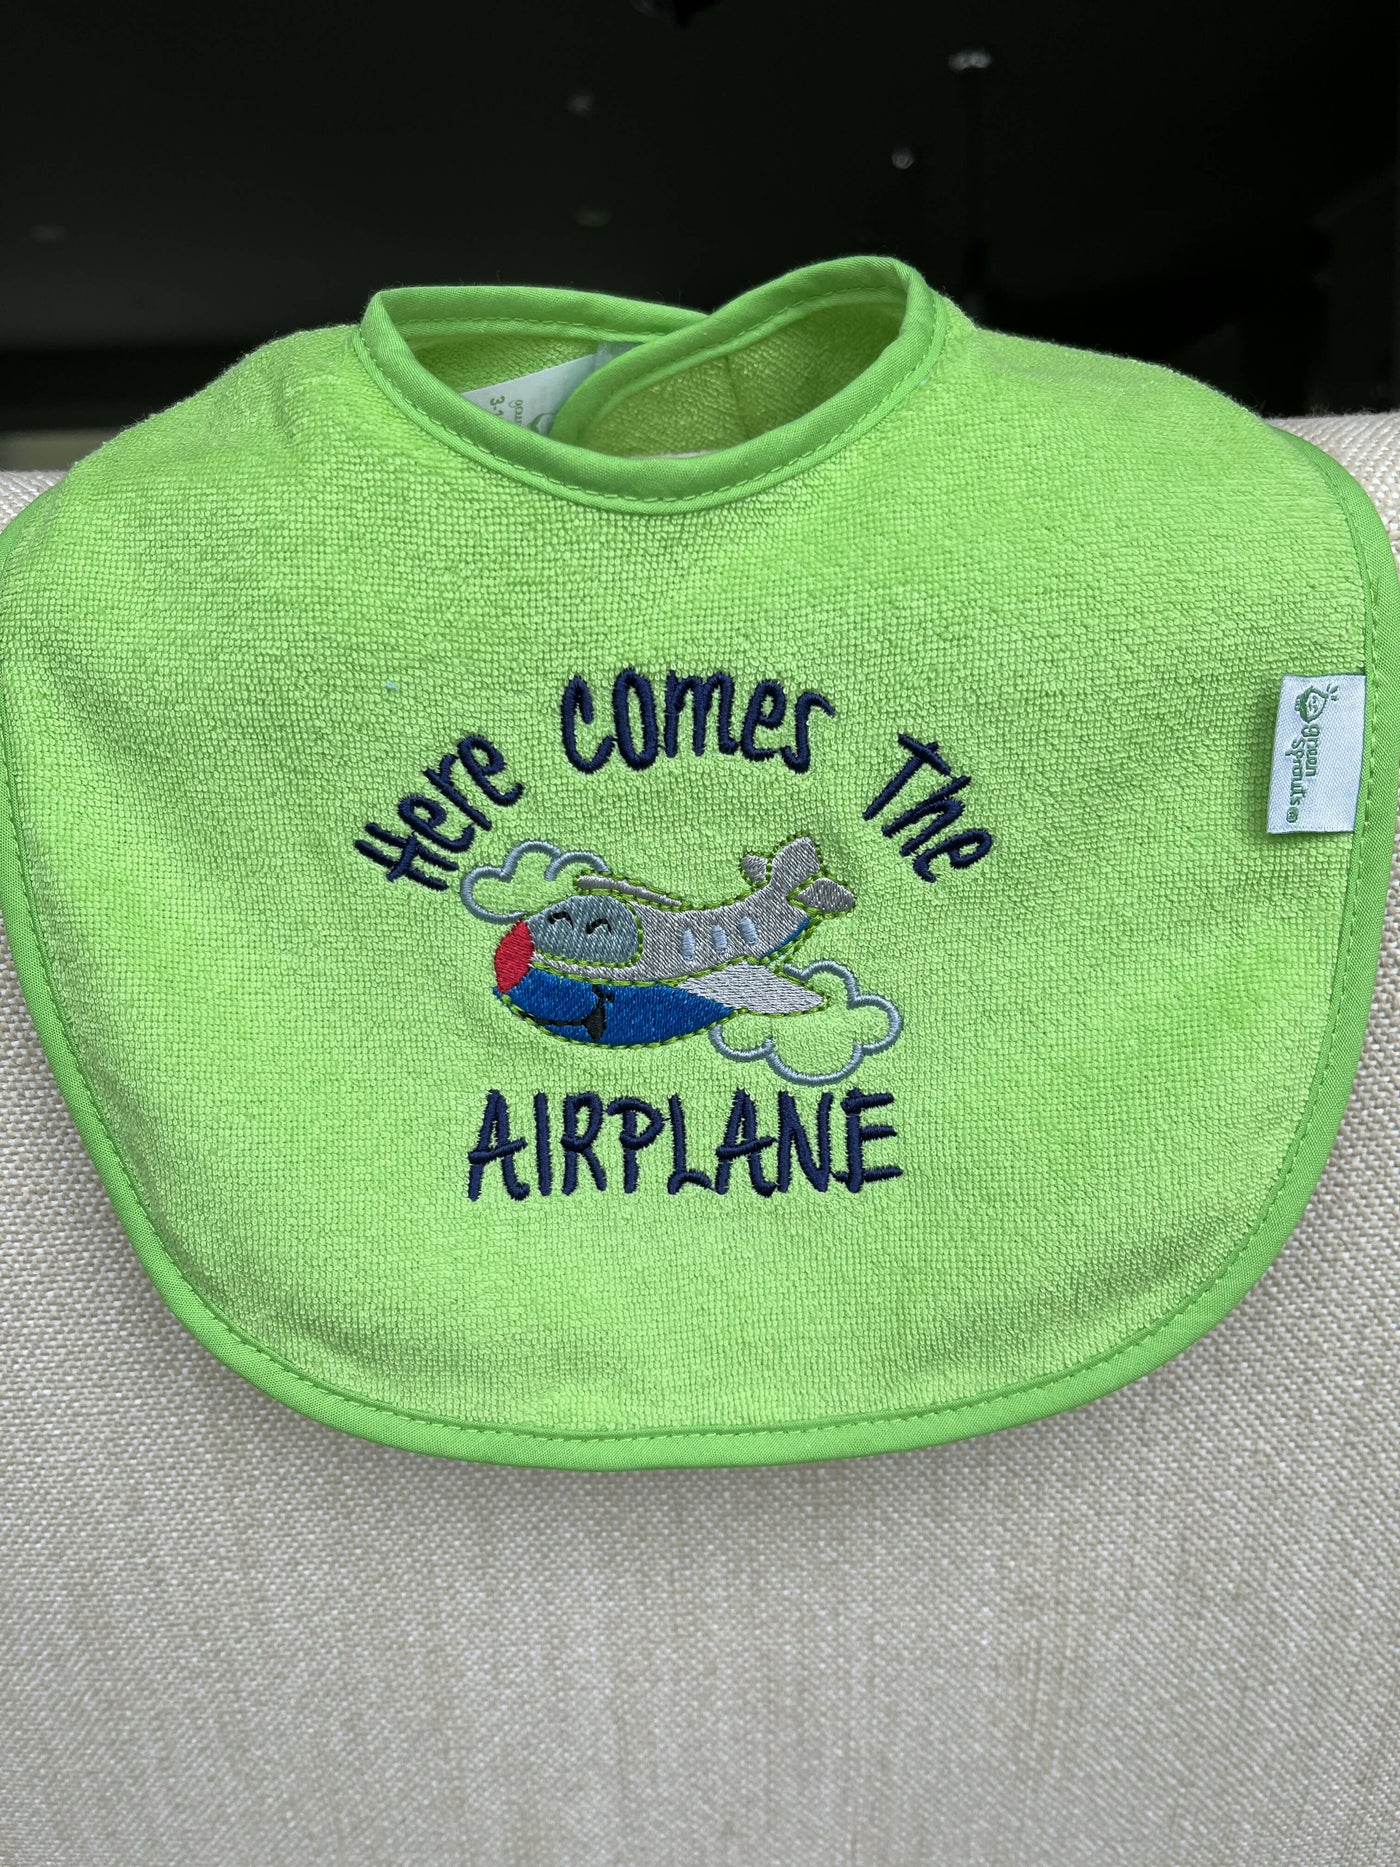 Here Comes The Airplane Baby Bib